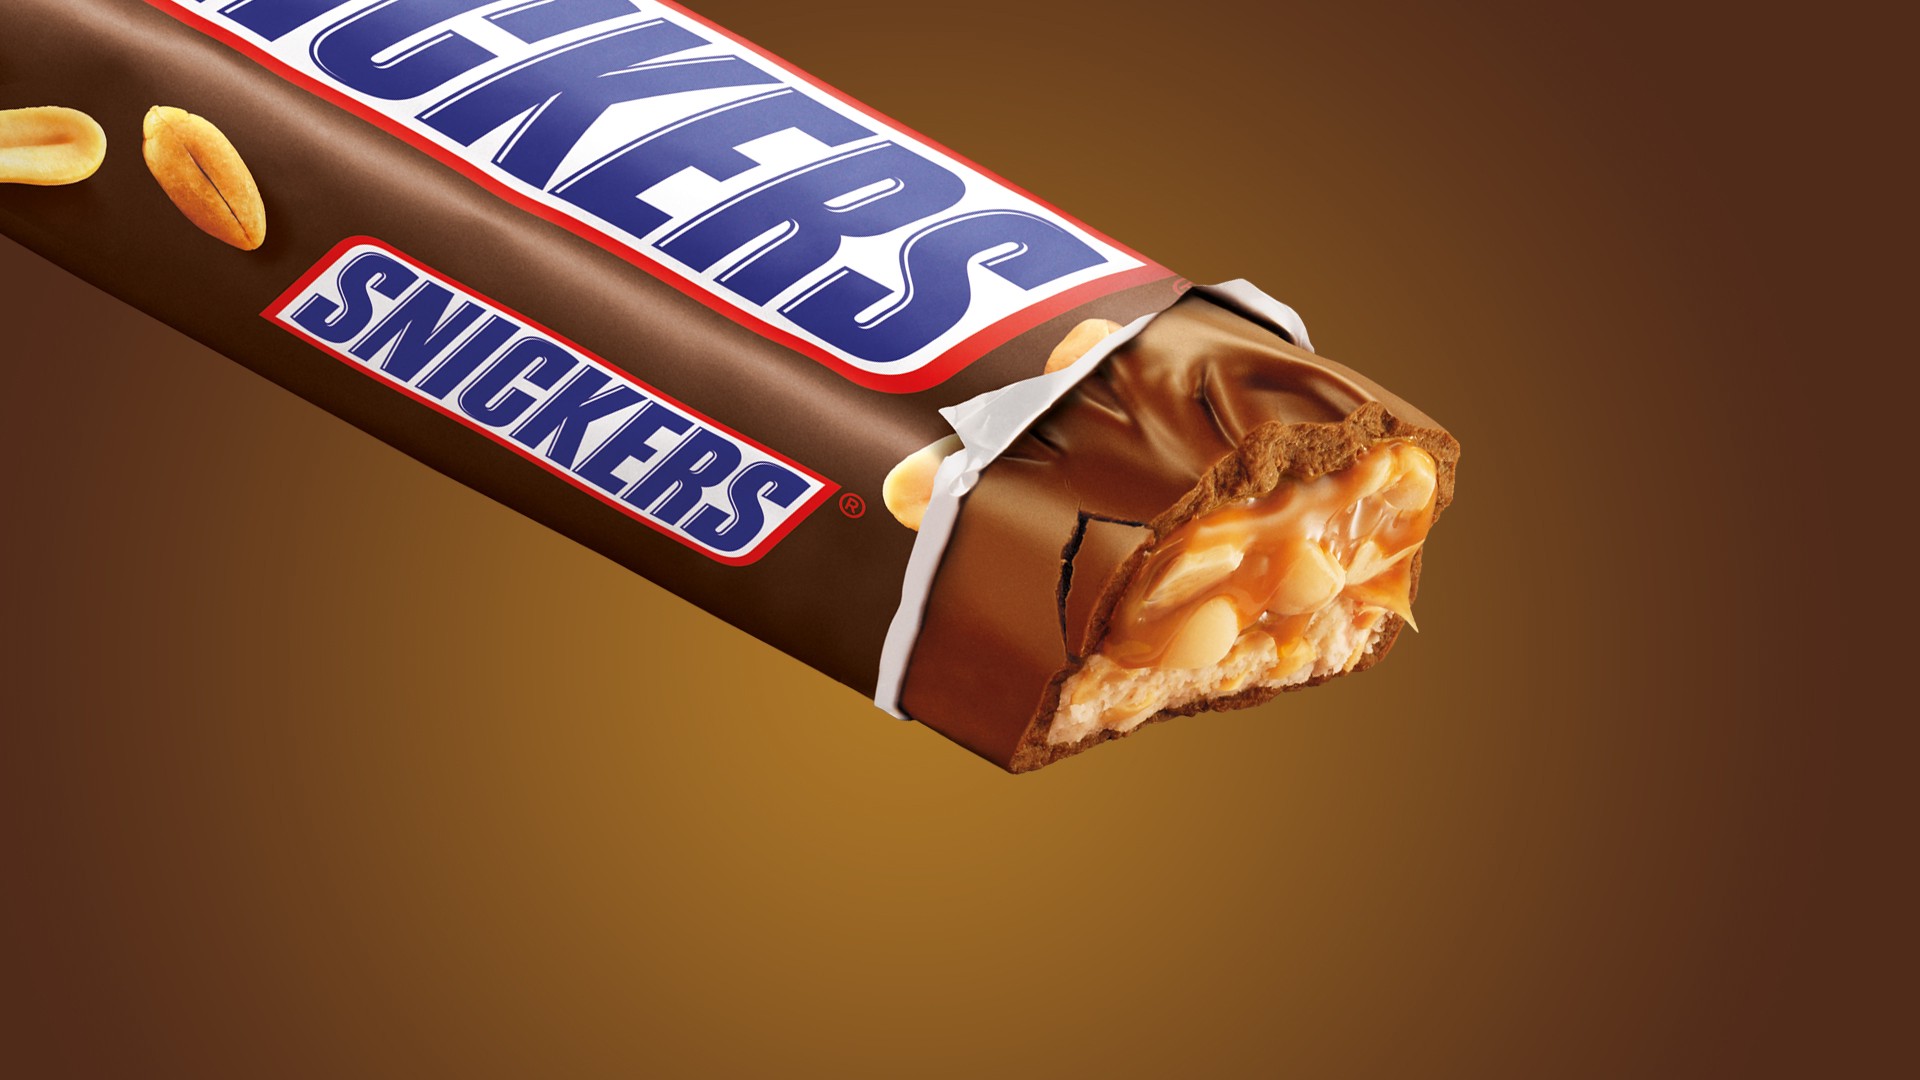 A Snickers as 